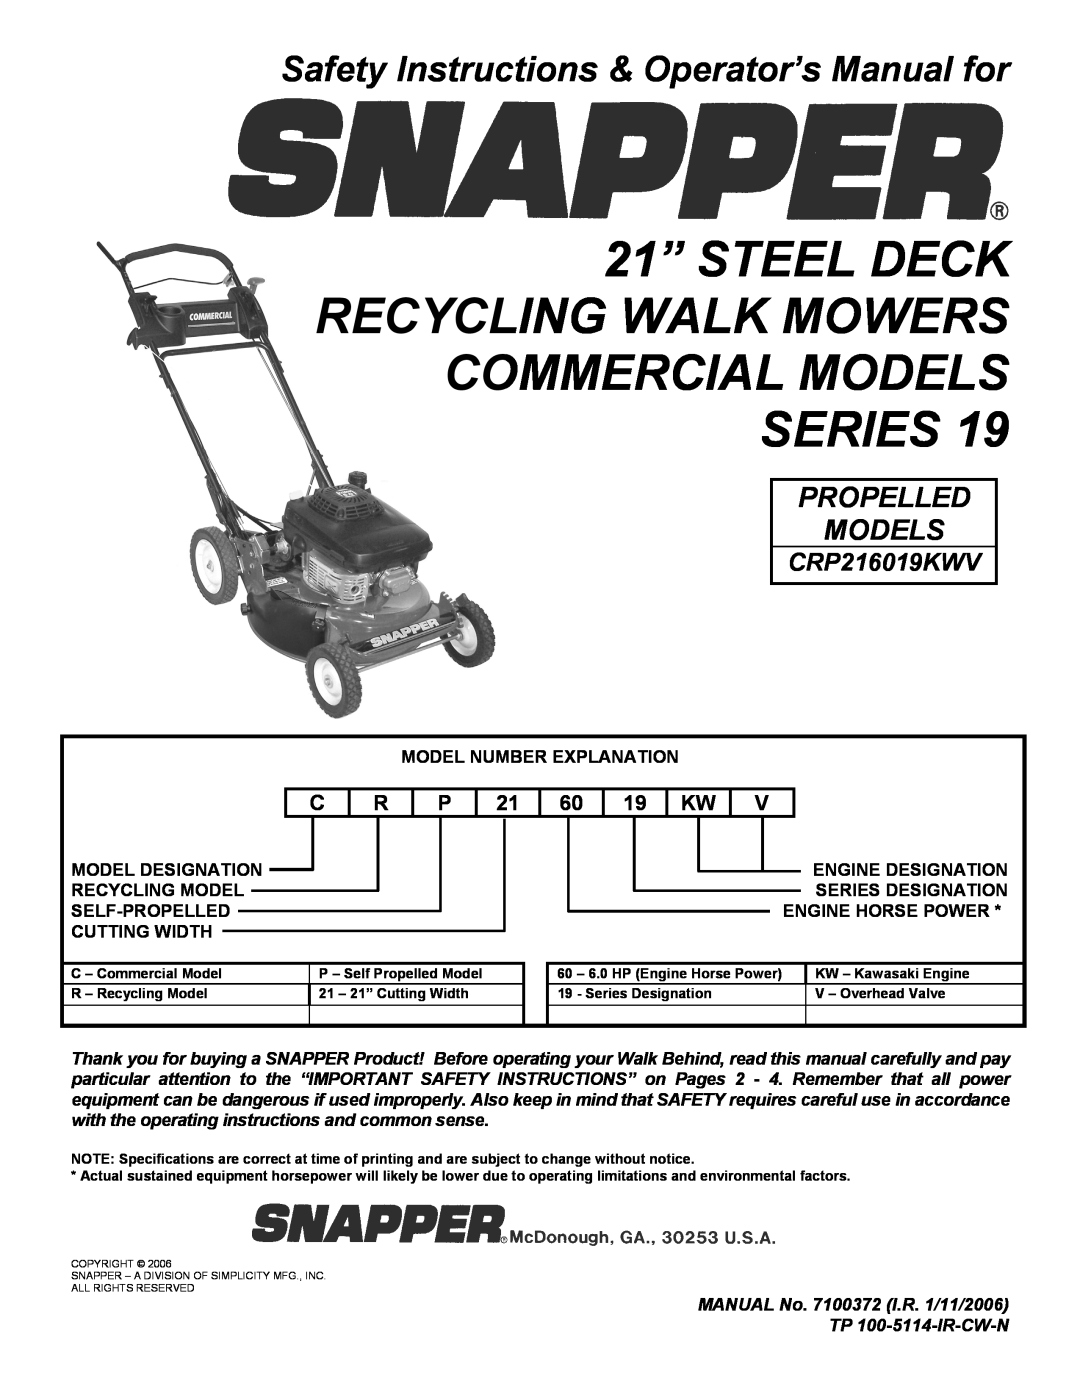 Snapper CRP216019KWV important safety instructions 21” STEEL DECK RECYCLING WALK MOWERS COMMERCIAL MODELS SERIES 